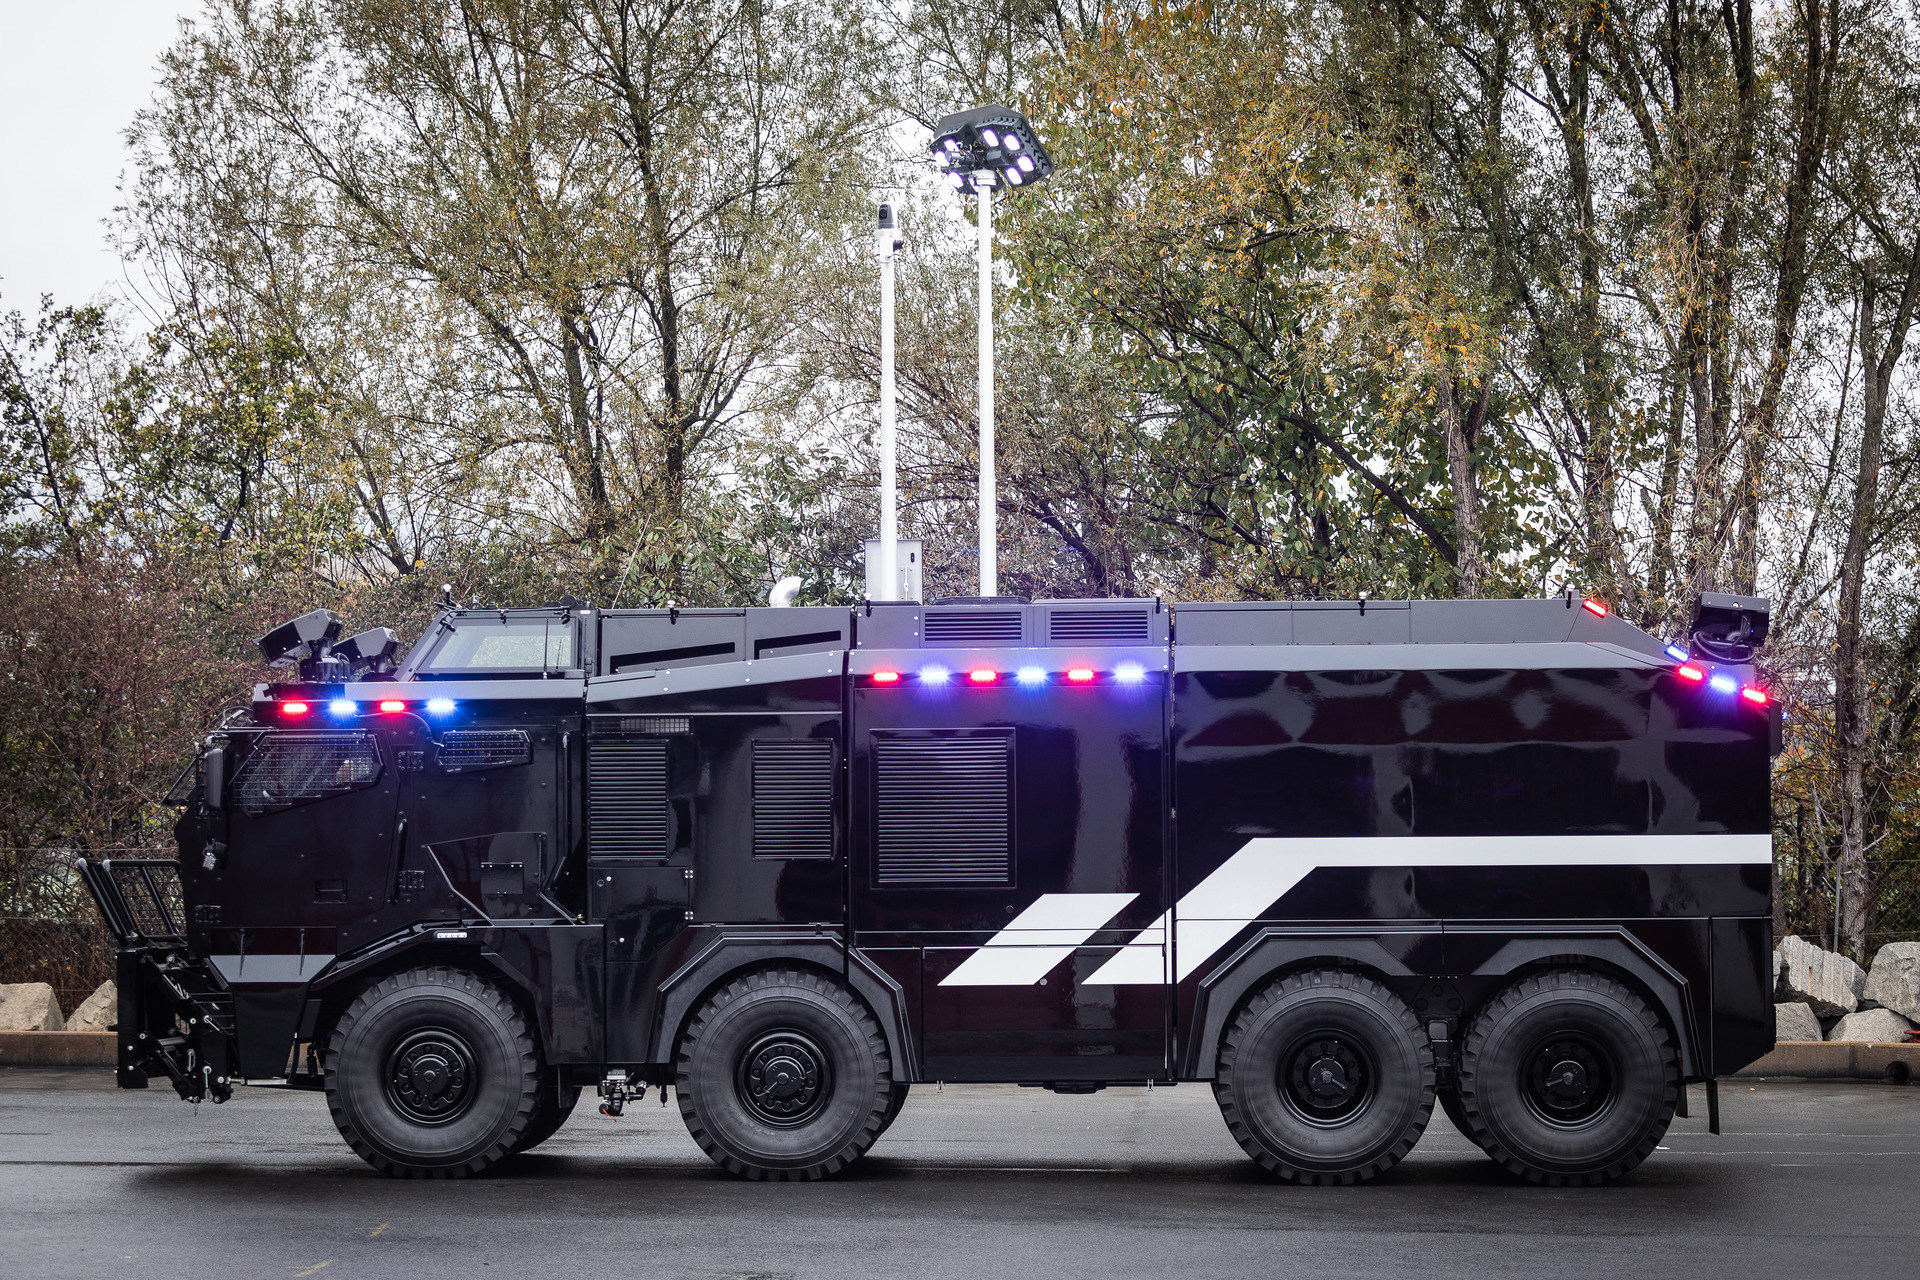 RUA Dynamics Makes Public Safety Rescue Vehicle Available to Law Enforcement | THE SHOP